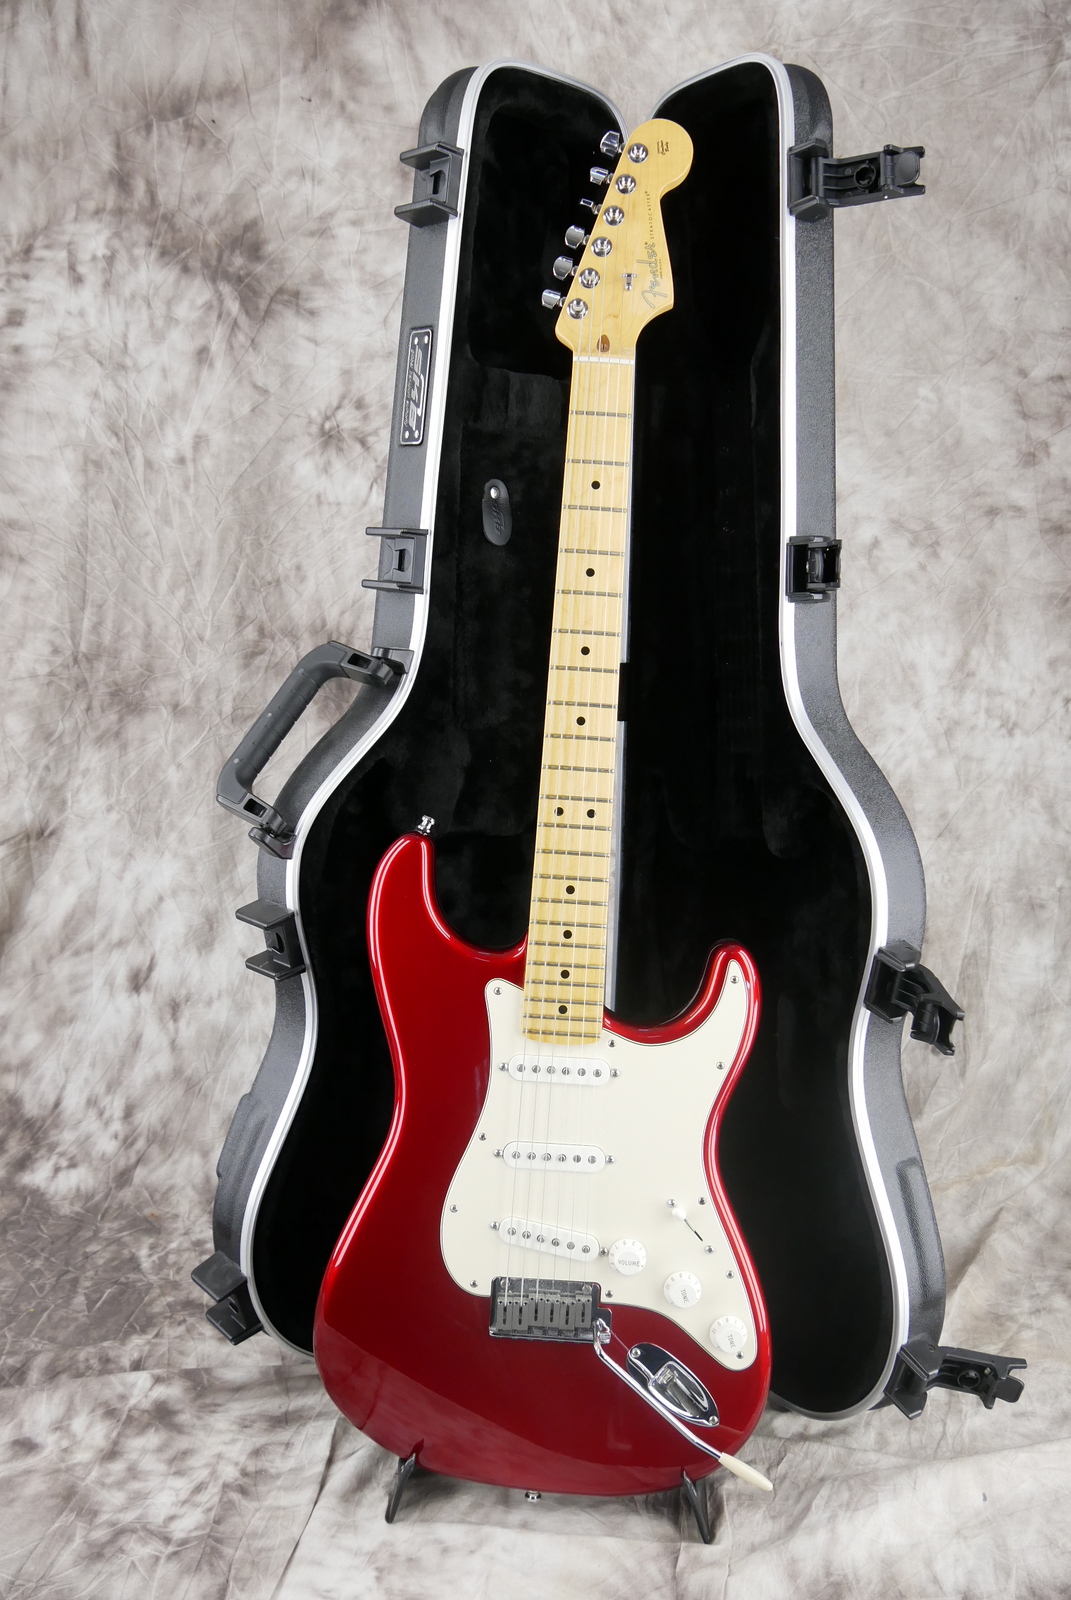 Fender_Stratocaster_USA_built_from_parts_candy_apple_red_2015-013.JPG